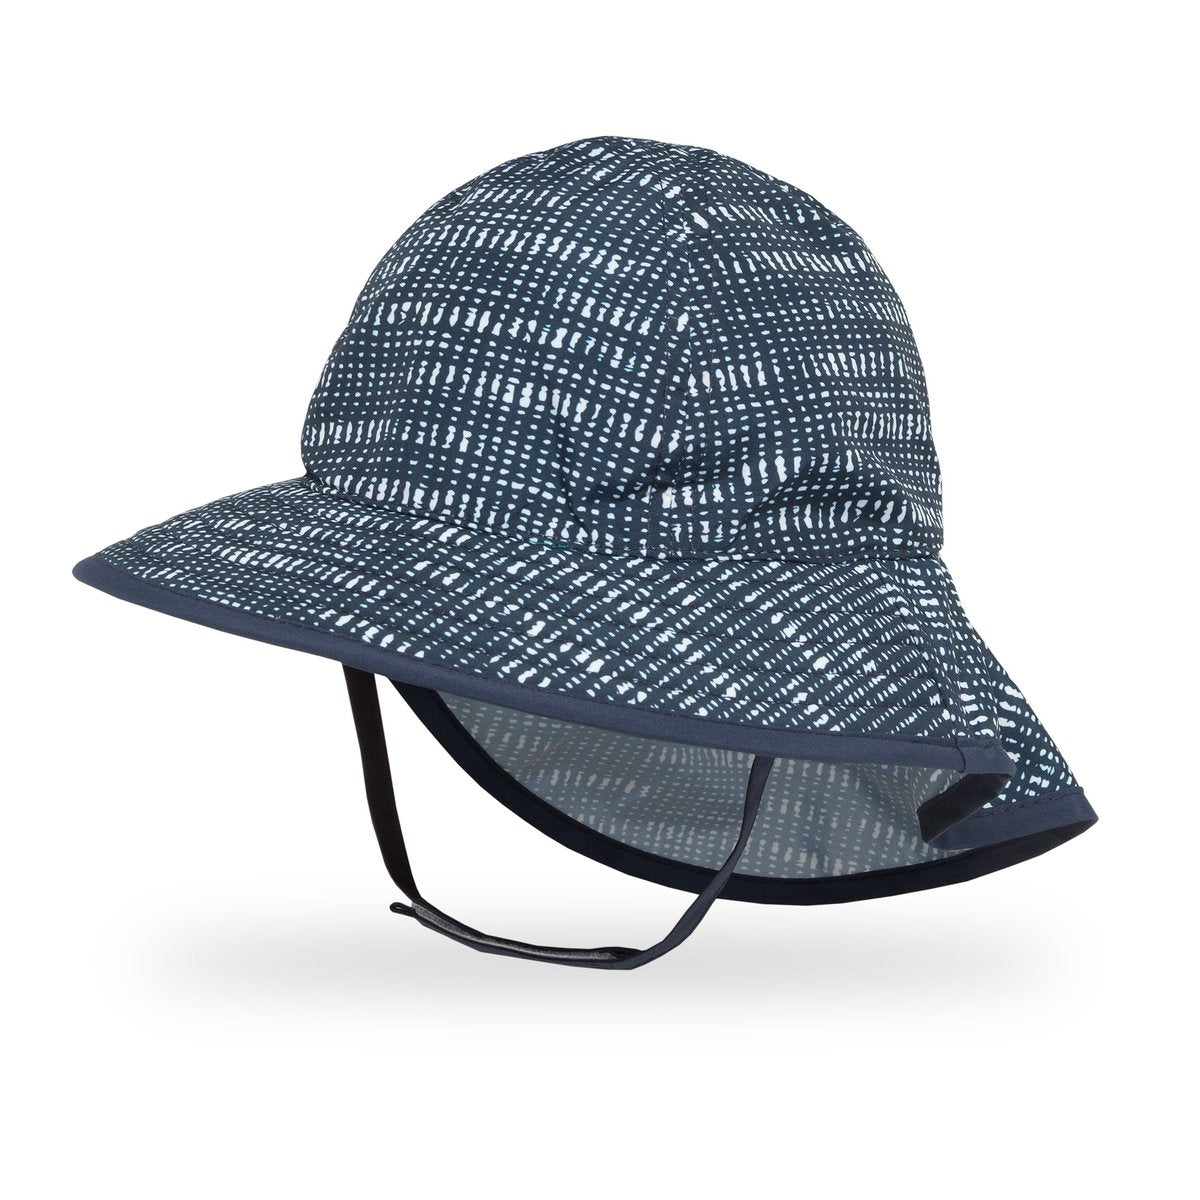 Sunday Afternoons Infant's Sunsprout Hat